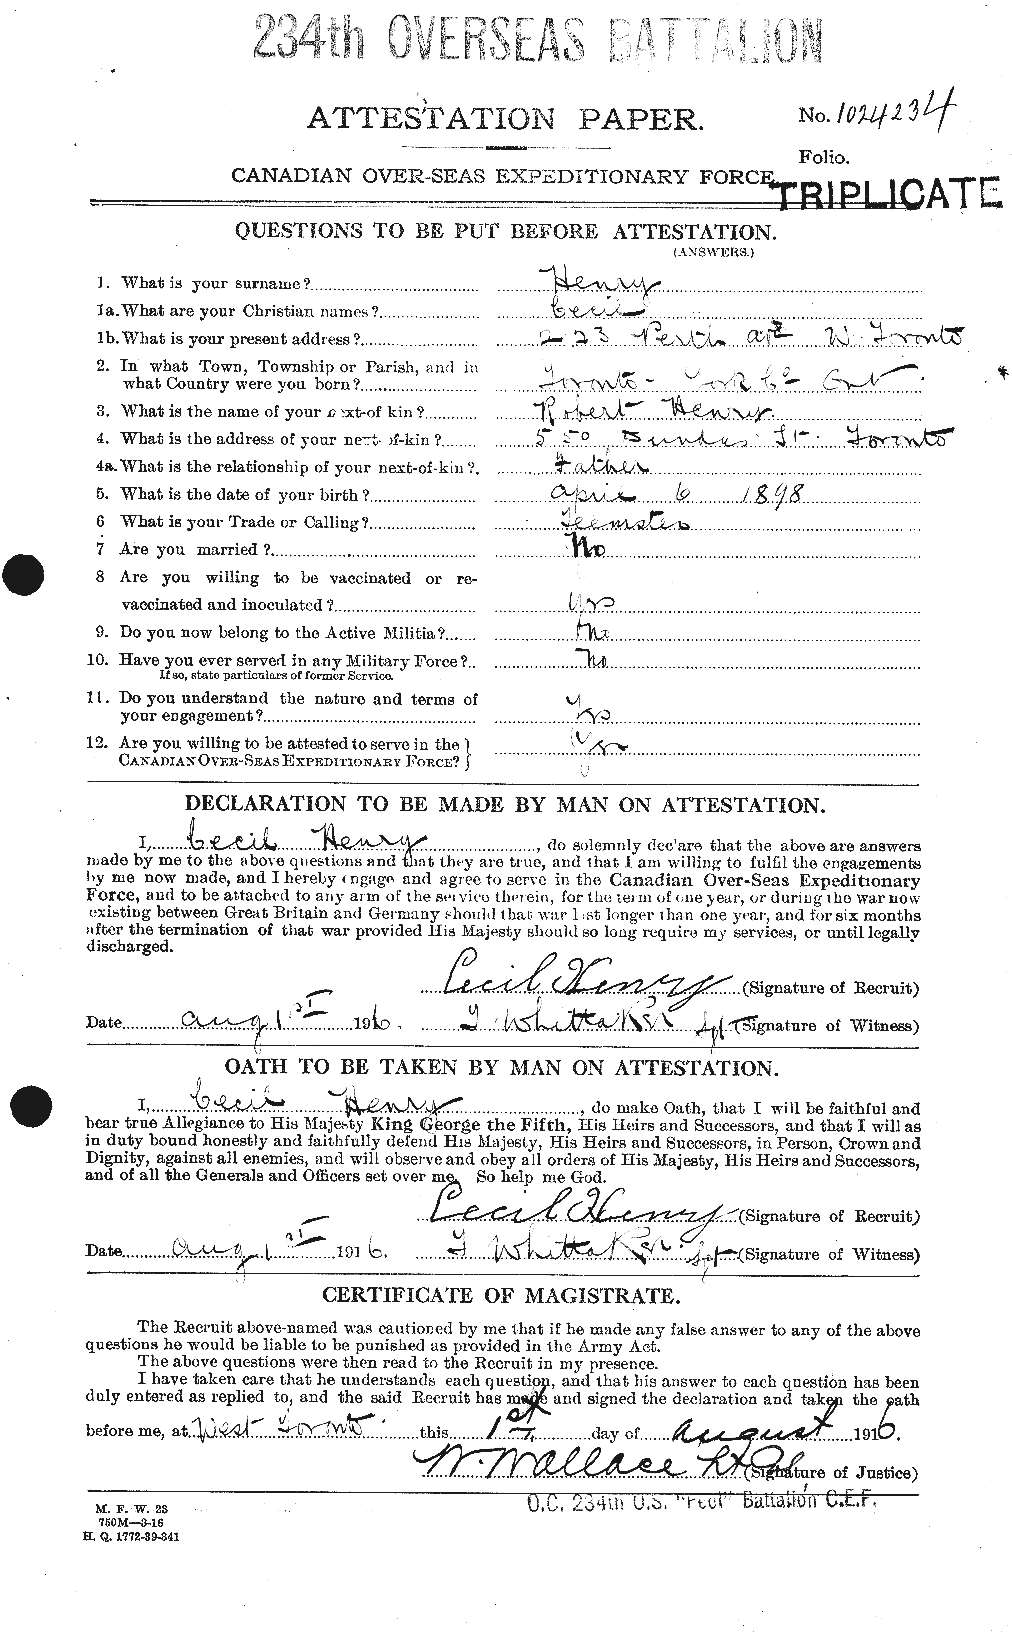 Personnel Records of the First World War - CEF 392796a